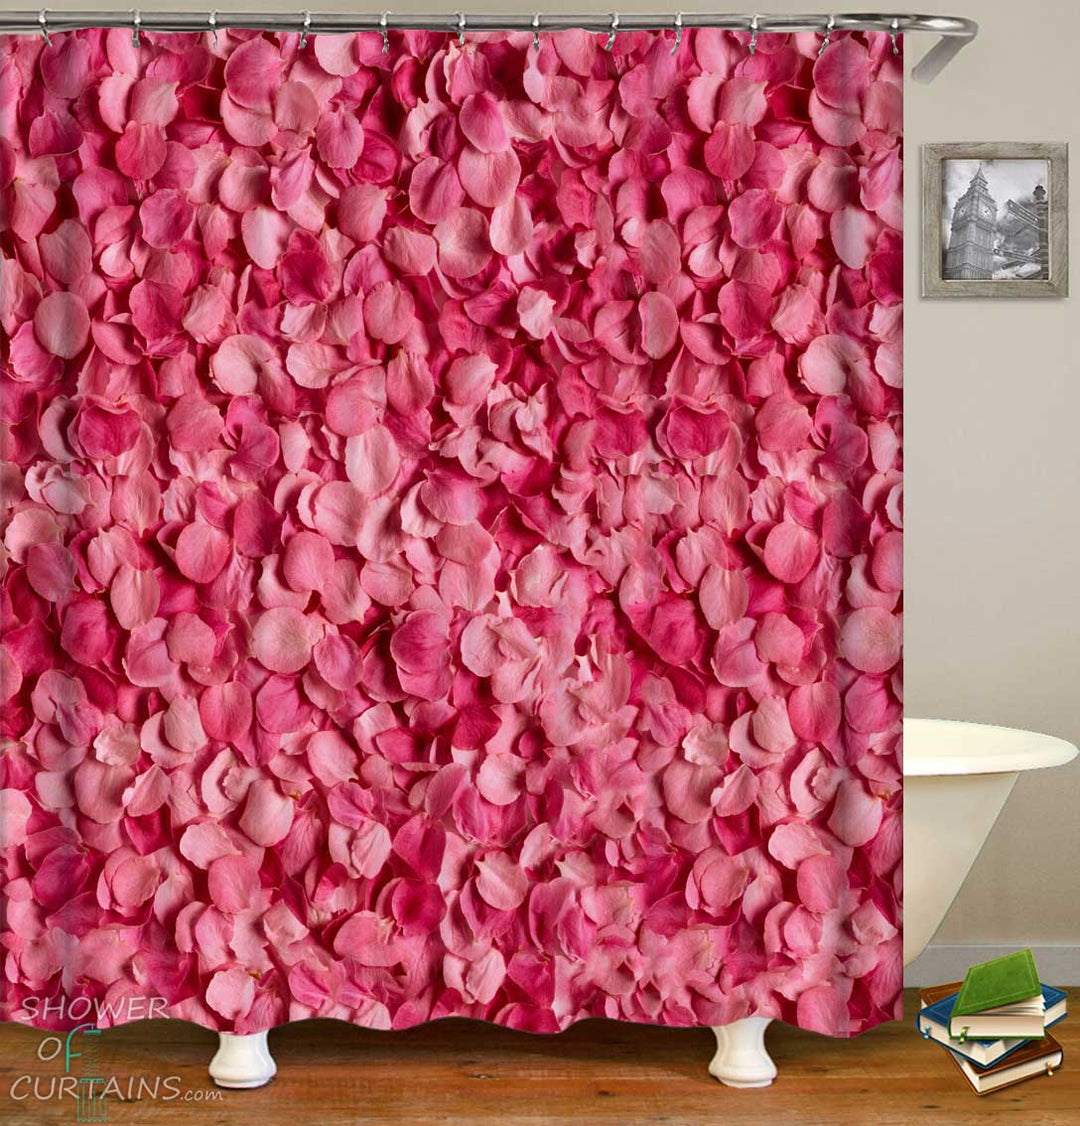 Shower Curtains with Pinkish Roses Petals